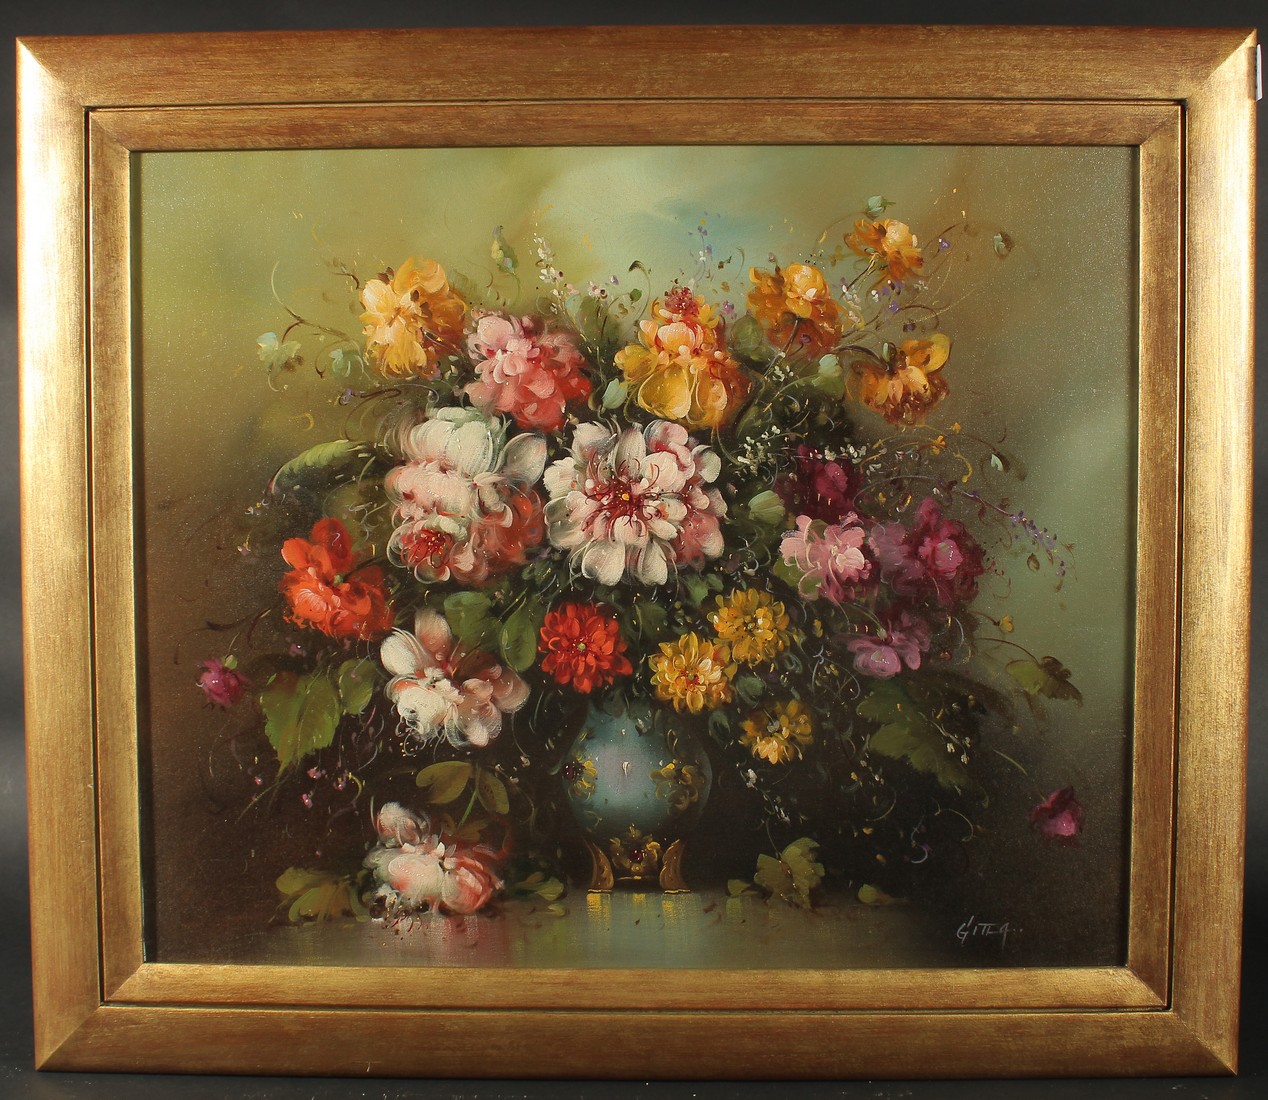 G. Itla (20th Century), A still life of mixed flowers in a vase, oil on canvas, signed, 20" x